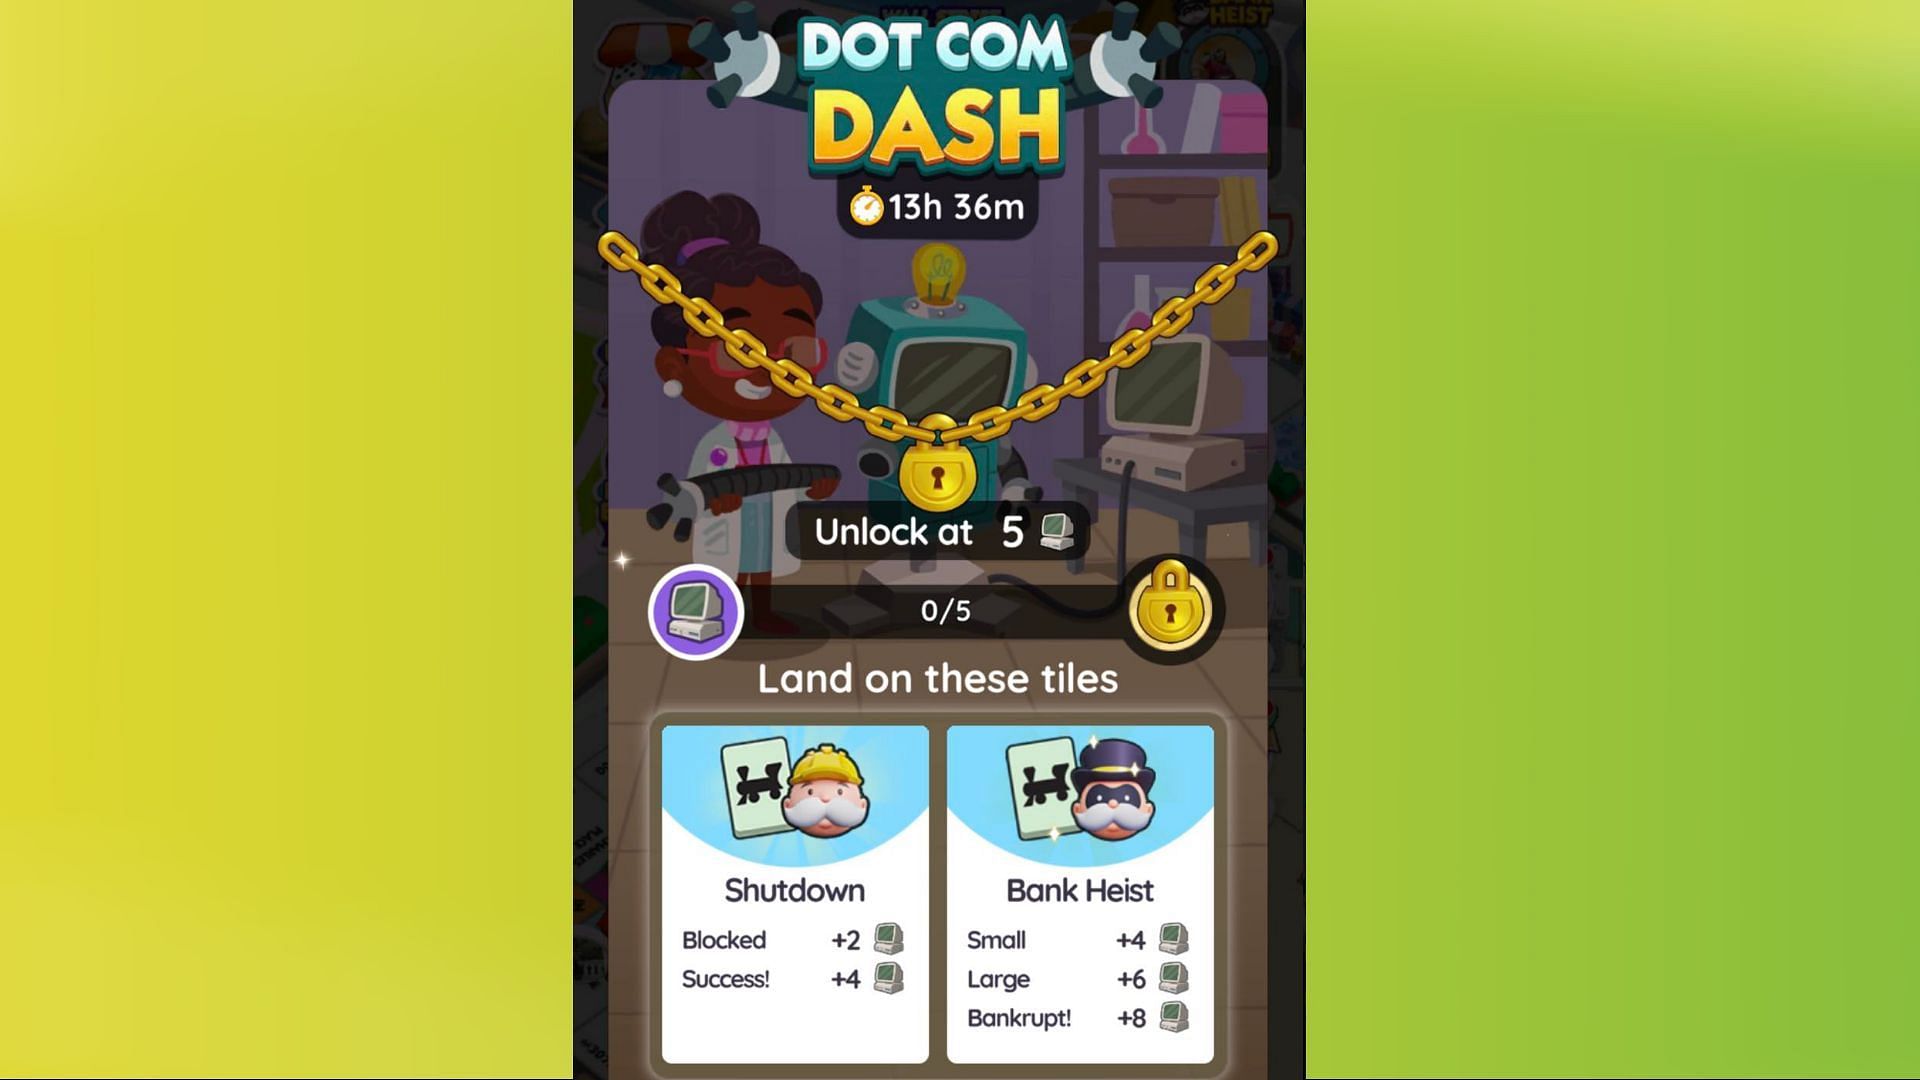 Snippet showing the Monopoly Go Dot Com Dash tournament scoring system (Image via Scopely)